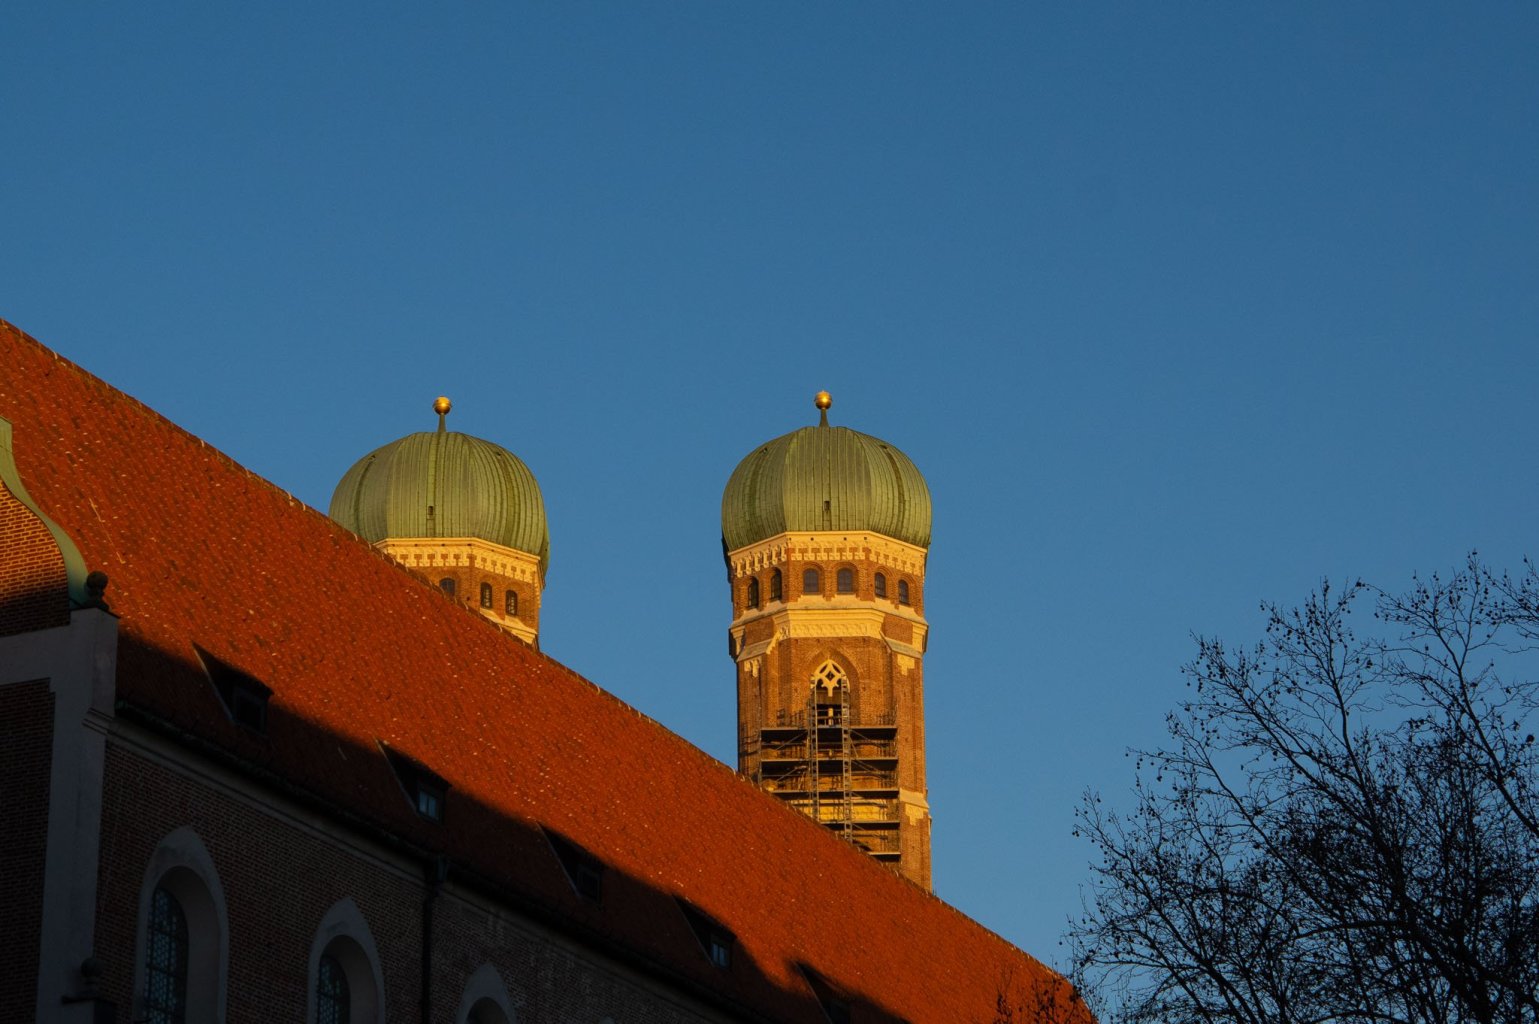 We will explicitly not talk about what those Frauenkirche towers remind us of